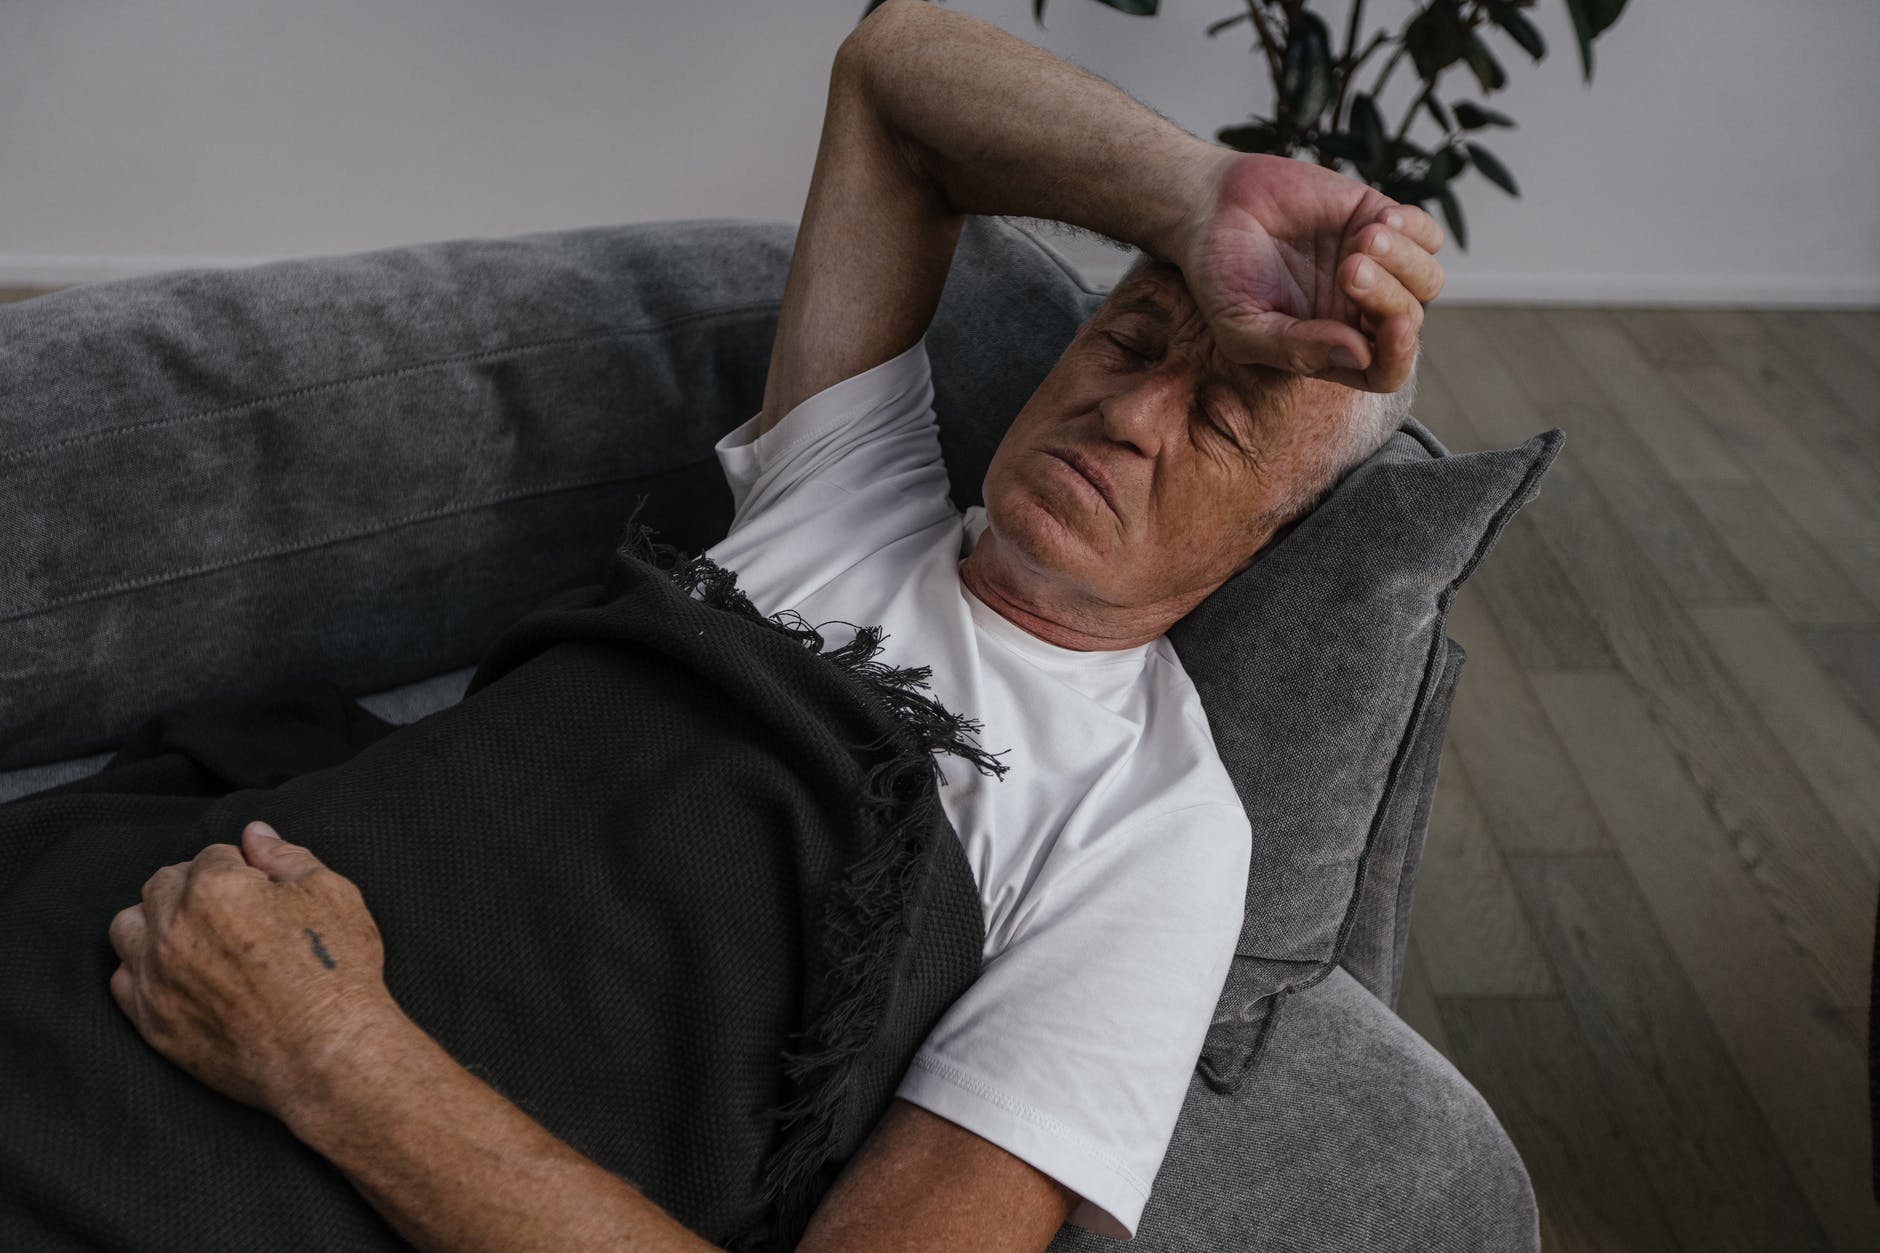 man in white shirt sleeping with hand on forehead